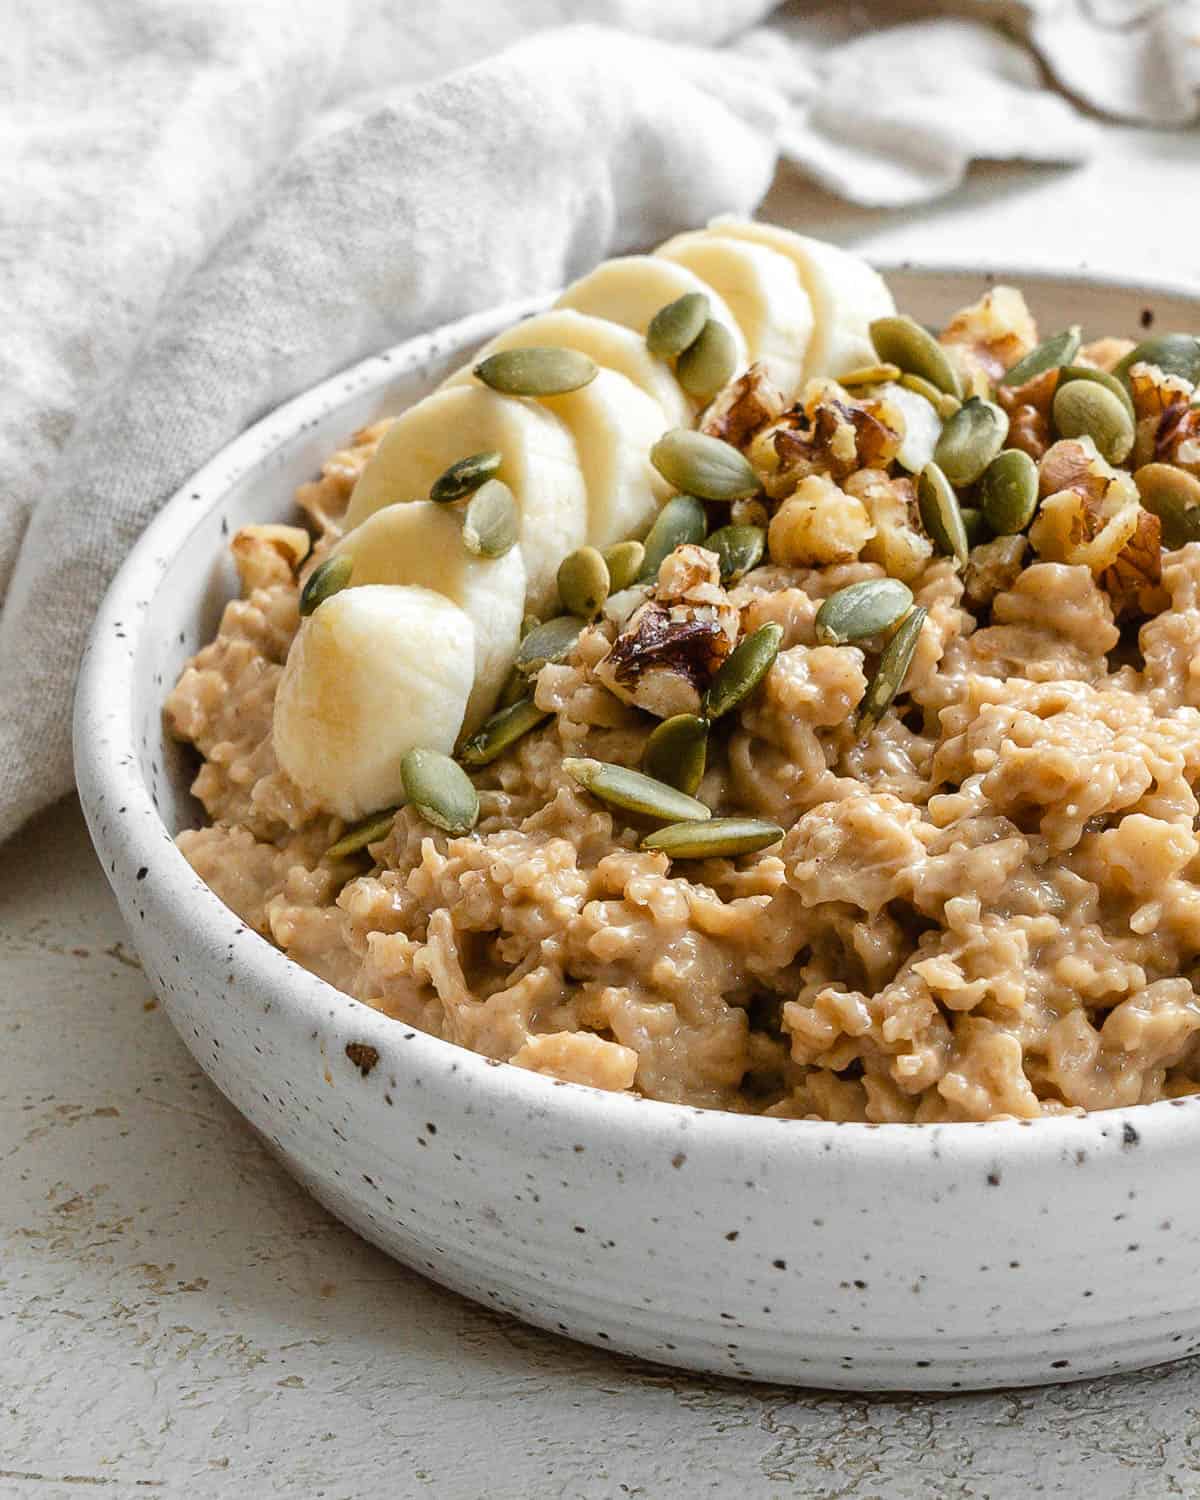 completed Easy Peanut Butter Oatmeal in a bowl against a light background